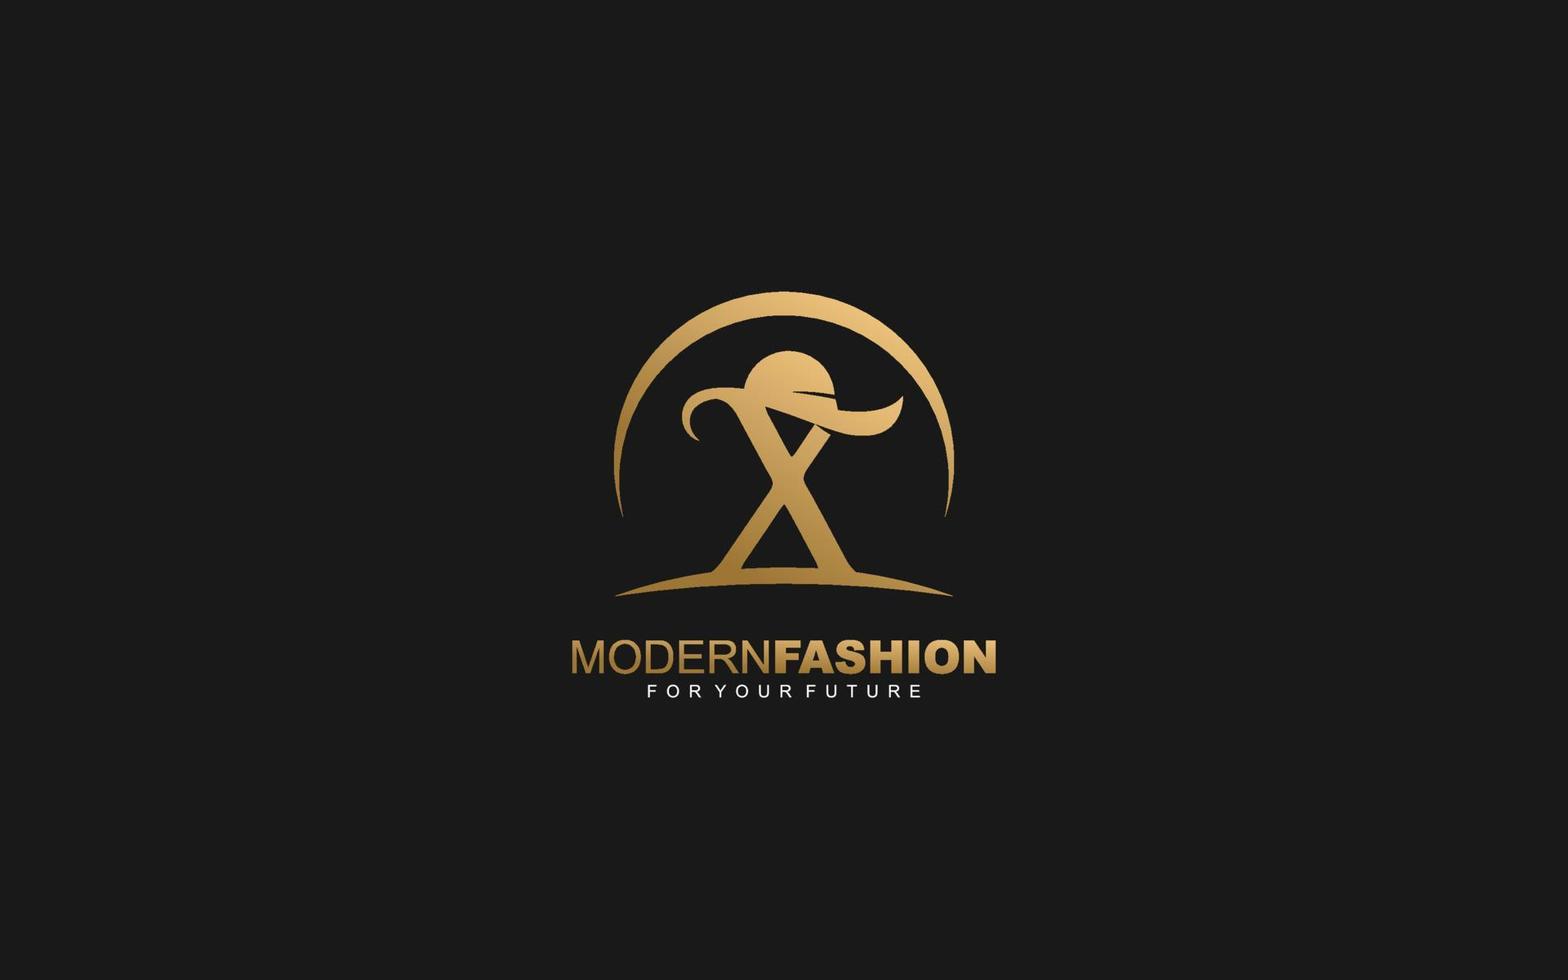 X logo fashion company. text identity template vector illustration for your brand.